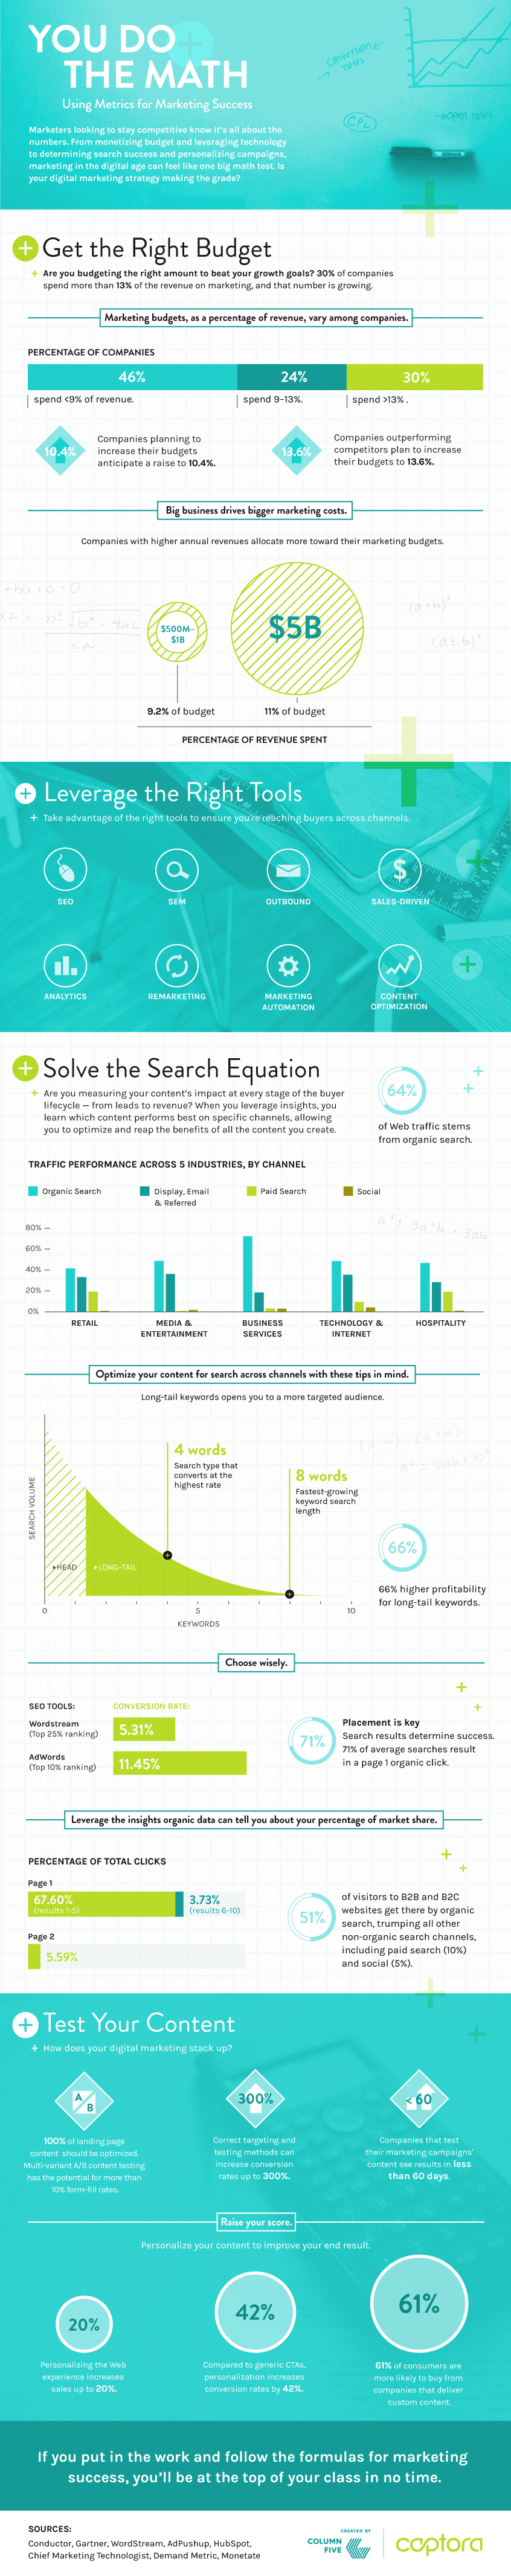 You Do The Math: Using Metrics for Marketing Success #infographic